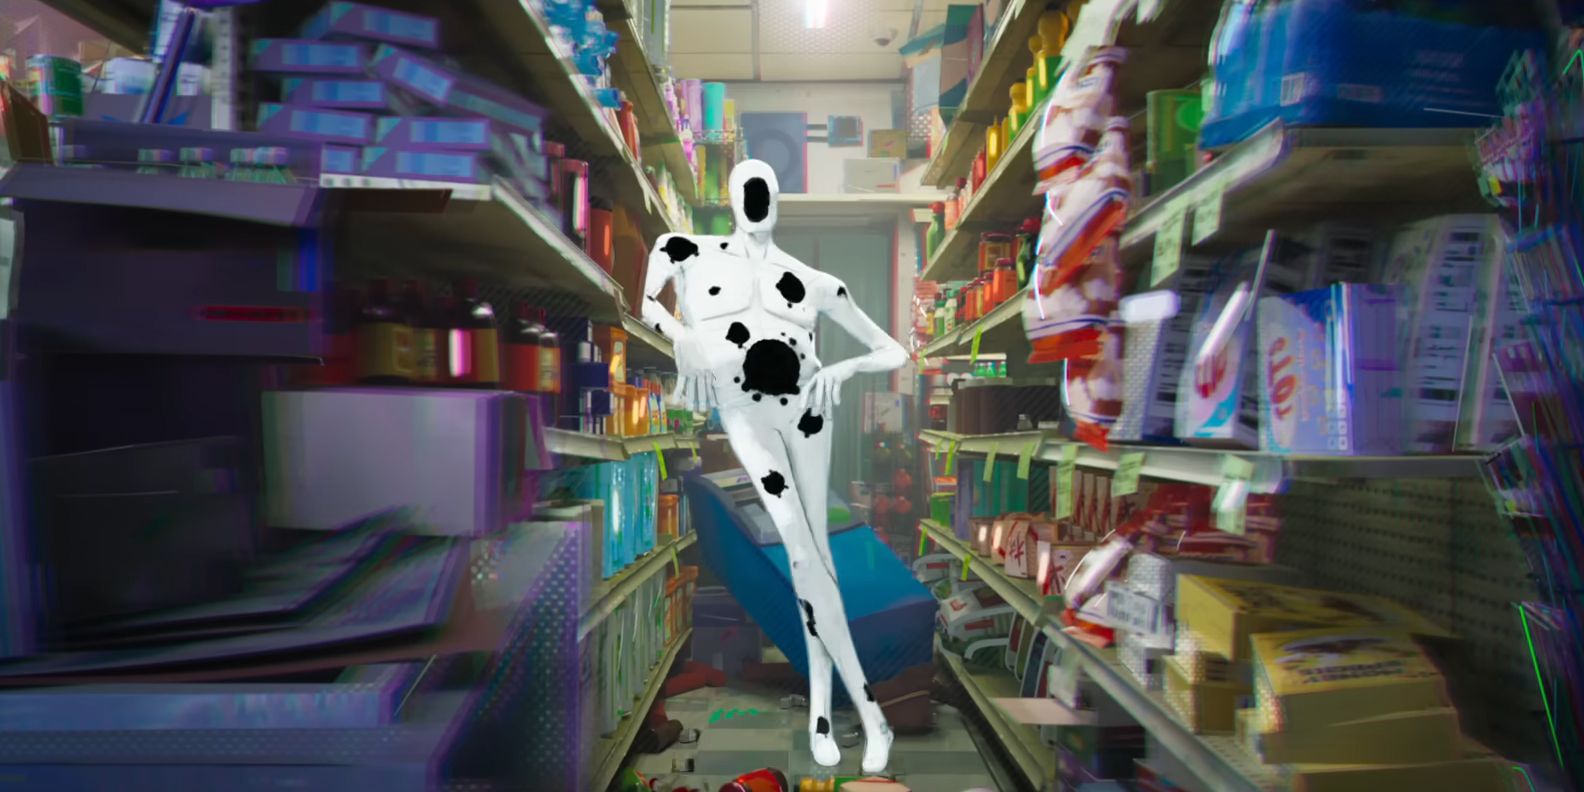 The Spot from 'Spider-Man: Across The Spiderverse', he is white figure with black holes on his body standing in a bodega aisle